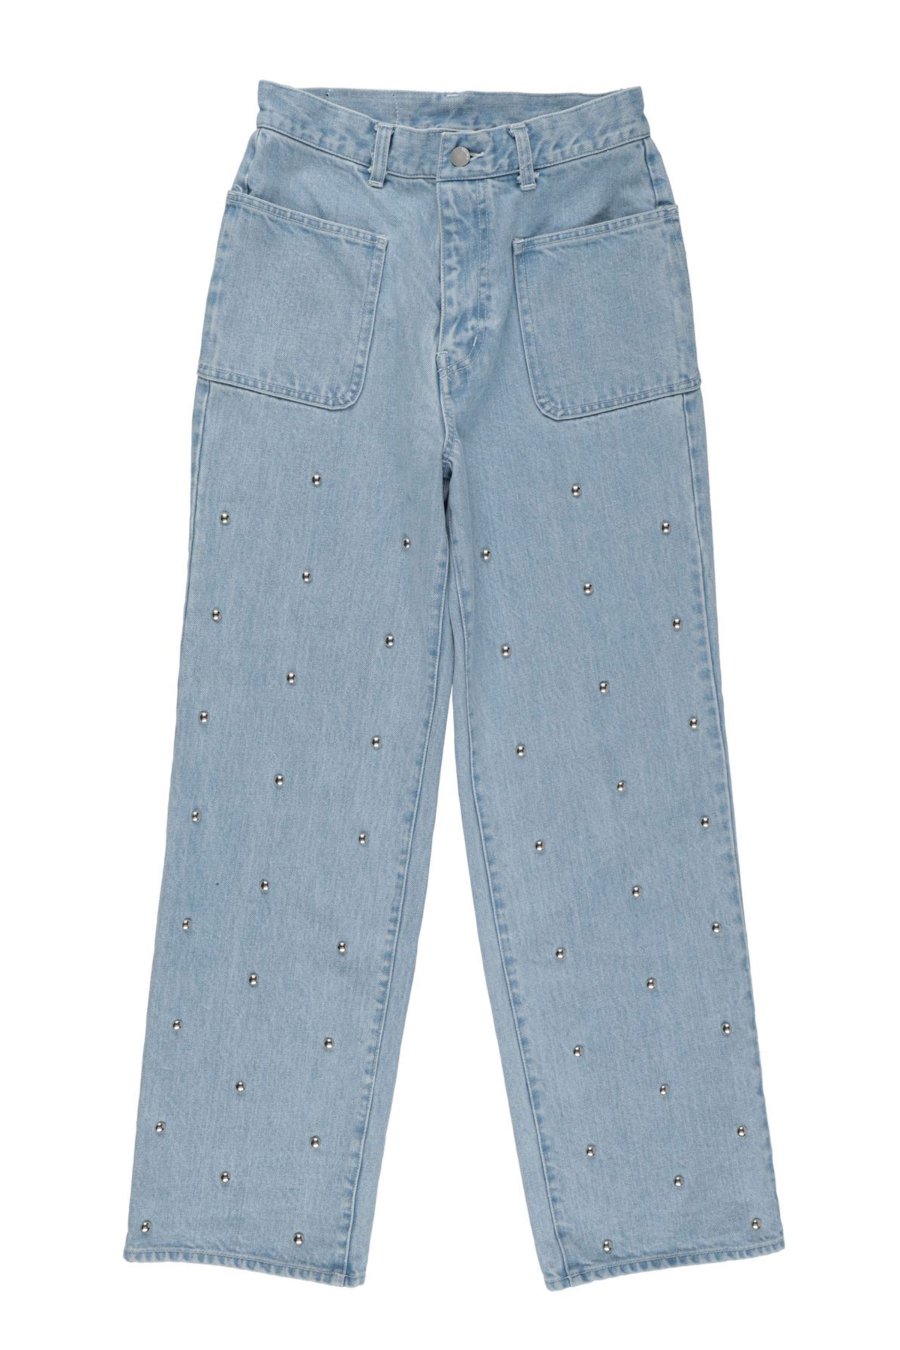 BELPER  22AW EMBELLISHED DENIM PANTS<img class='new_mark_img2' src='https://img.shop-pro.jp/img/new/icons15.gif' style='border:none;display:inline;margin:0px;padding:0px;width:auto;' />